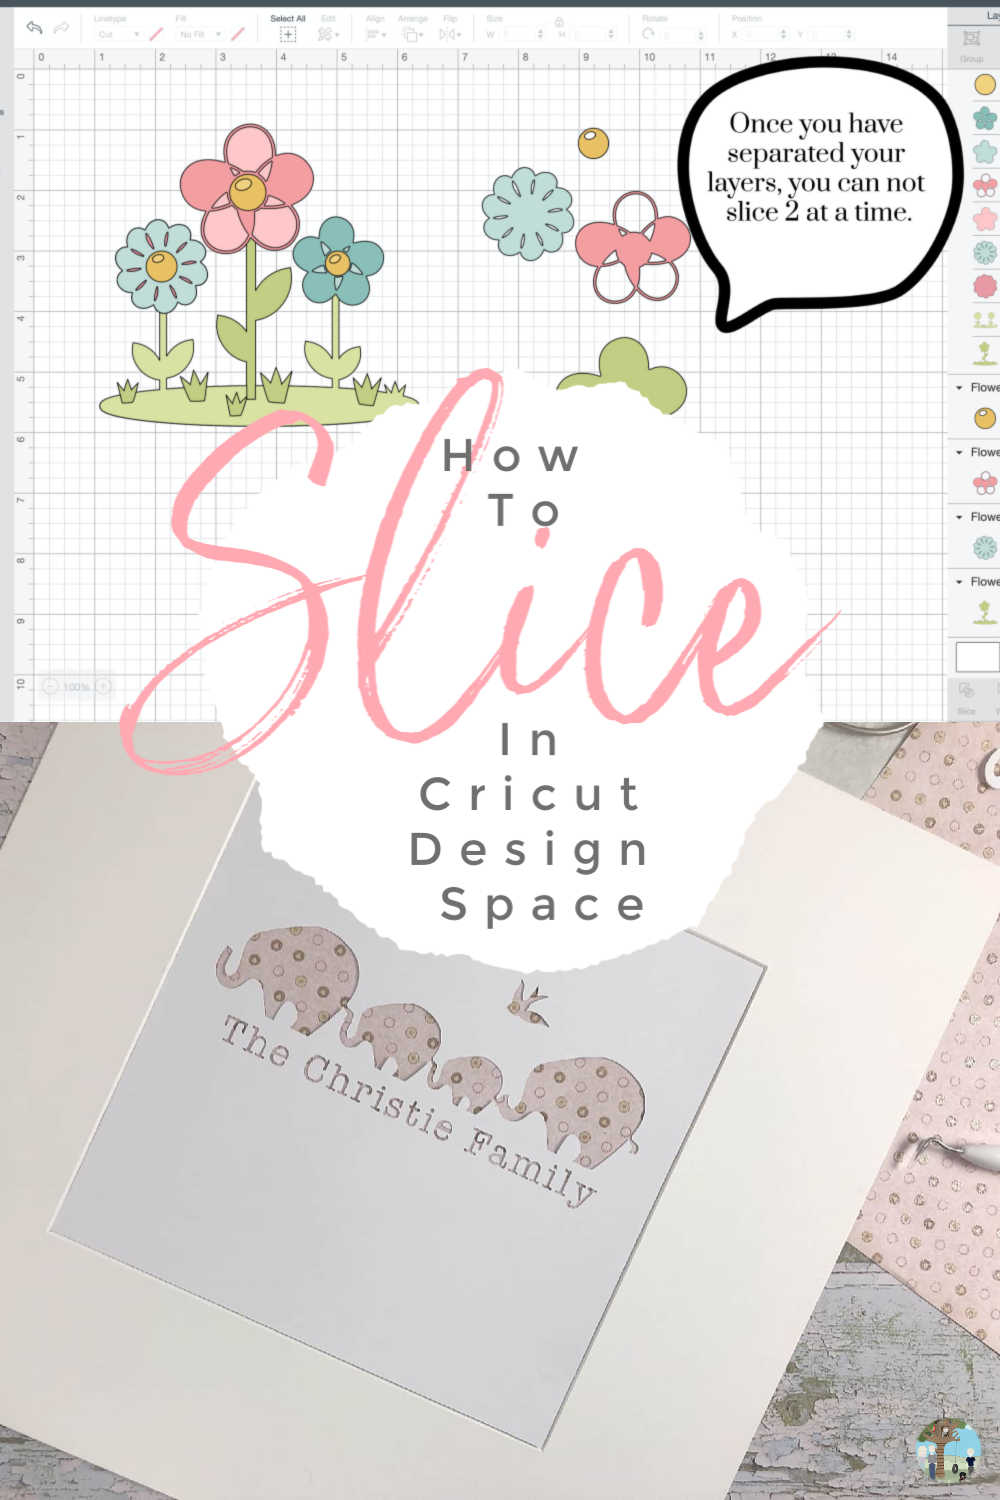 How to slice in Cricut Design Space and what to do if you image won't slice.